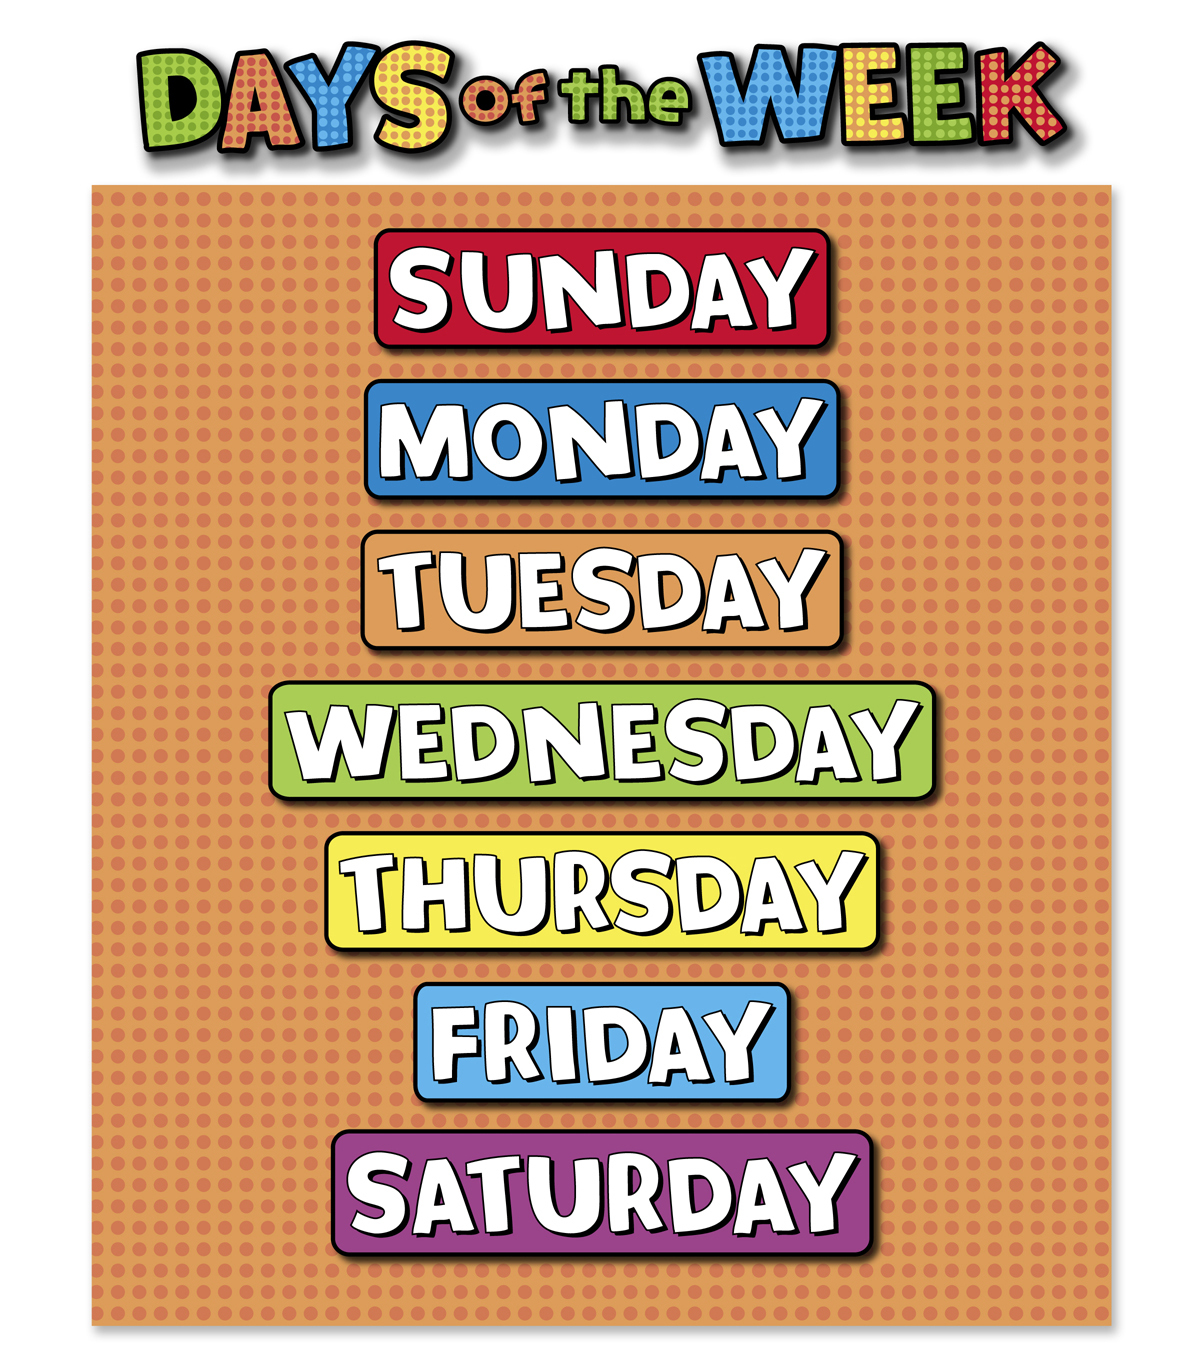 Picture of the week. Days of the week. Карточки на тему Days of the week. Days of the week плакат. Days of the week картинки.